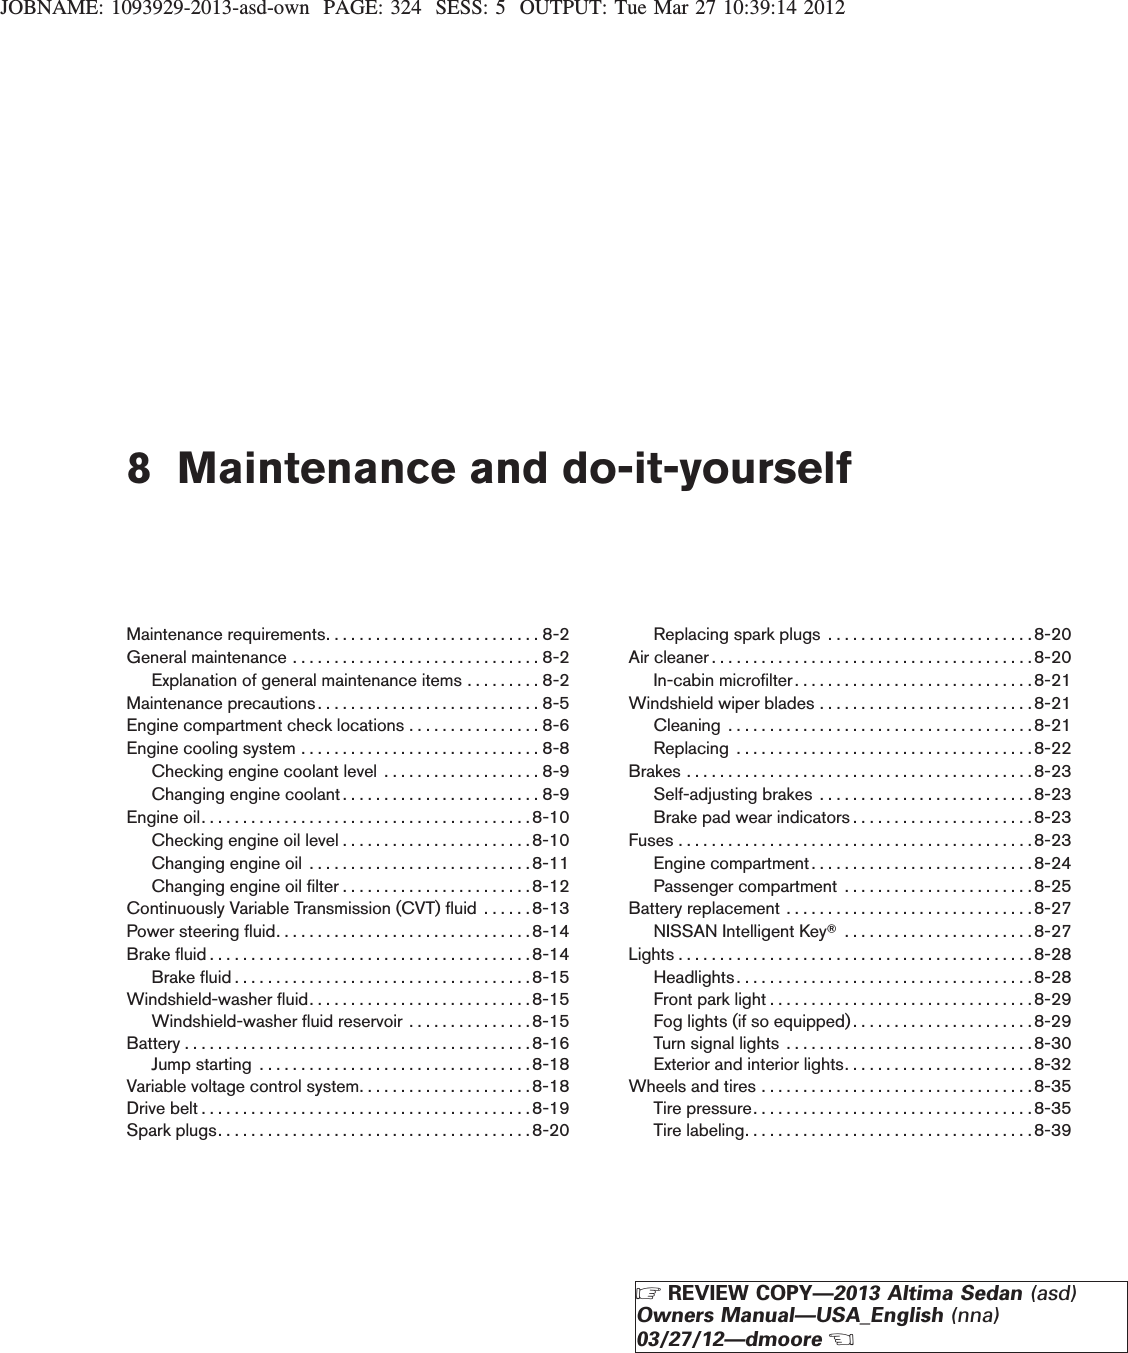 JOBNAME: 1093929-2013-asd-own PAGE: 324 SESS: 5 OUTPUT: Tue Mar 27 10:39:14 20128 Maintenance and do-it-yourselfMaintenance requirements. . . . . . . . . . . . . . . . . . . . . . . . . . 8-2Generalmaintenance..............................8-2Explanation of general maintenance items . . . . . . . . . 8-2Maintenance precautions . . . . . . . . . . . . . . . . . . . . . . . . . . . 8-5Engine compartment check locations . . . . . . . . . . . . . . . . 8-6Enginecoolingsystem.............................8-8Checking engine coolant level . . . . . . . . . . . . . . . . . . . 8-9Changing engine coolant. . . . . . . . . . . . . . . . . . . . . . . . 8-9Engineoil........................................8-10Checking engine oil level . . . . . . . . . . . . . . . . . . . . . . .8-10Changingengineoil ...........................8-11Changing engine oil filter . . . . . . . . . . . . . . . . . . . . . . .8-12Continuously Variable Transmission (CVT) fluid . . . . . . 8-13Powersteeringfluid...............................8-14Brakefluid.......................................8-14Brakefluid....................................8-15Windshield-washer fluid. . . . . . . . . . . . . . . . . . . . . . . . . . . 8-15Windshield-washer fluid reservoir . . . . . . . . . . . . . . .8-15Battery..........................................8-16Jumpstarting .................................8-18Variable voltage control system. . . . . . . . . . . . . . . . . . . . .8-18Drivebelt........................................8-19Sparkplugs......................................8-20Replacing spark plugs . . . . . . . . . . . . . . . . . . . . . . . . .8-20Air cleaner . . . . . . . . . . . . . . . . . . . . . . . . . . . . . . . . . . . . . . .8-20In-cabin microfilter . . . . . . . . . . . . . . . . . . . . . . . . . . . . .8-21Windshield wiper blades . . . . . . . . . . . . . . . . . . . . . . . . . .8-21Cleaning .....................................8-21Replacing ....................................8-22Brakes . . . . . . . . . . . . . . . . . . . . . . . . . . . . . . . . . . . . . . . . . .8-23Self-adjusting brakes . . . . . . . . . . . . . . . . . . . . . . . . . . 8-23Brake pad wear indicators . . . . . . . . . . . . . . . . . . . . . .8-23Fuses . . . . . . . . . . . . . . . . . . . . . . . . . . . . . . . . . . . . . . . . . . .8-23Enginecompartment...........................8-24Passenger compartment . . . . . . . . . . . . . . . . . . . . . . .8-25Battery replacement . . . . . . . . . . . . . . . . . . . . . . . . . . . . . . 8-27NISSAN Intelligent KeyT.......................8-27Lights . . . . . . . . . . . . . . . . . . . . . . . . . . . . . . . . . . . . . . . . . . .8-28Headlights. . . . . . . . . . . . . . . . . . . . . . . . . . . . . . . . . . . .8-28Front park light . . . . . . . . . . . . . . . . . . . . . . . . . . . . . . . .8-29Fog lights (if so equipped). . . . . . . . . . . . . . . . . . . . . . 8-29Turn signal lights . . . . . . . . . . . . . . . . . . . . . . . . . . . . . .8-30Exterior and interior lights. . . . . . . . . . . . . . . . . . . . . . .8-32Wheels and tires . . . . . . . . . . . . . . . . . . . . . . . . . . . . . . . . . 8-35Tire pressure. . . . . . . . . . . . . . . . . . . . . . . . . . . . . . . . . .8-35Tire labeling. . . . . . . . . . . . . . . . . . . . . . . . . . . . . . . . . . . 8-39ZREVIEW COPY—2013 Altima Sedan (asd)Owners Manual—USA_English (nna)03/27/12—dmooreX